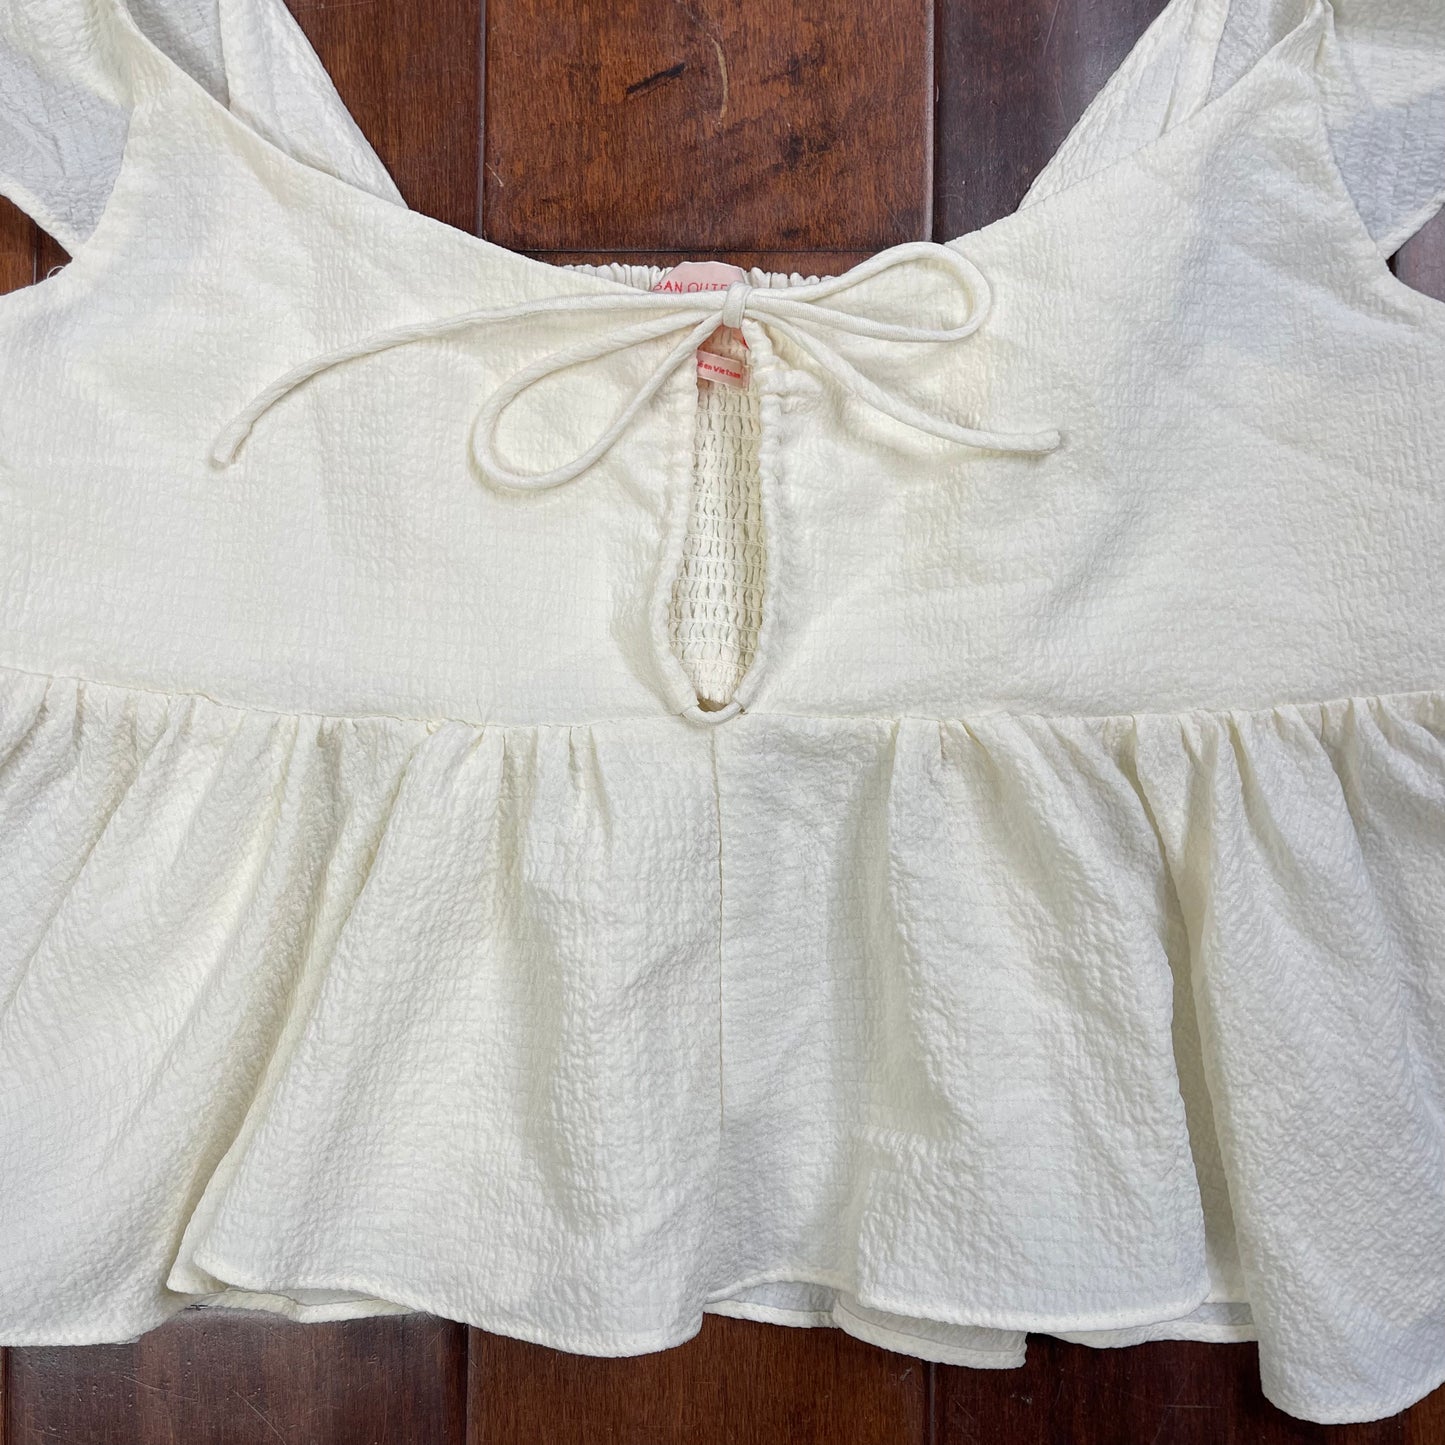 THRIFTED CREAM BABYDOLL TOP